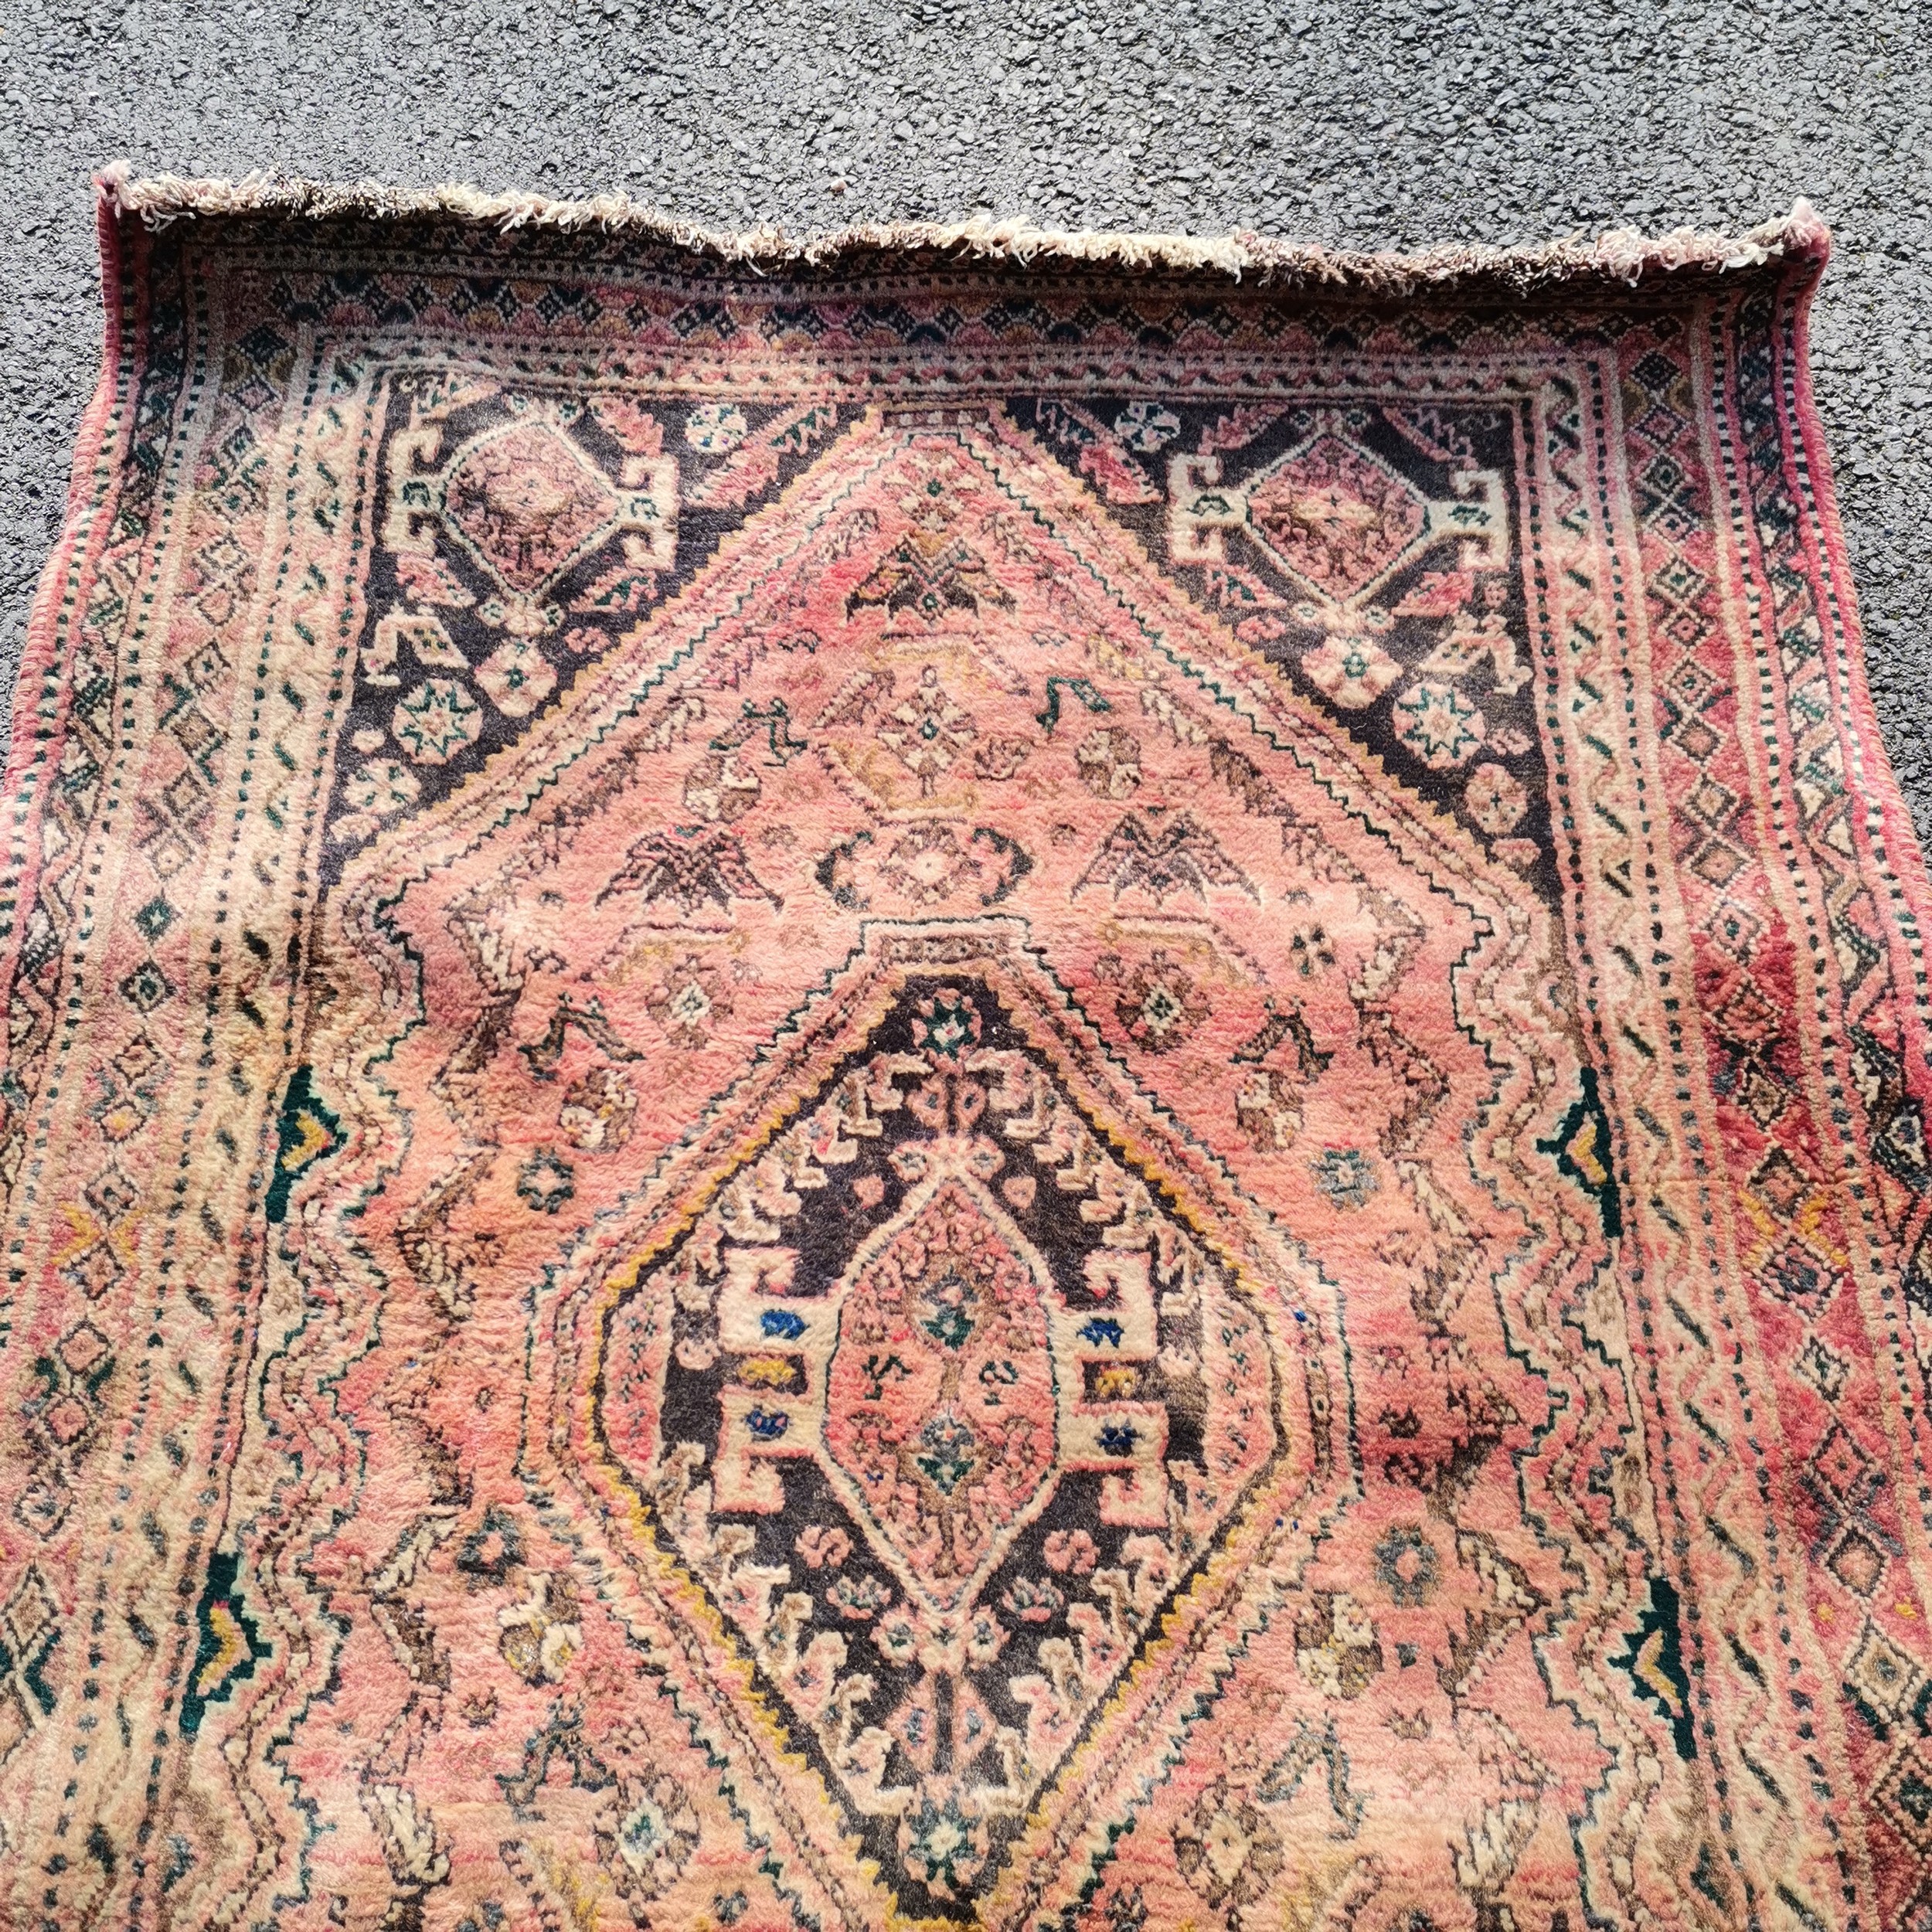 Pink wool grounded rug ~ 172cm x 118cm - no obvious signs of damage, slight creasings - Image 3 of 3